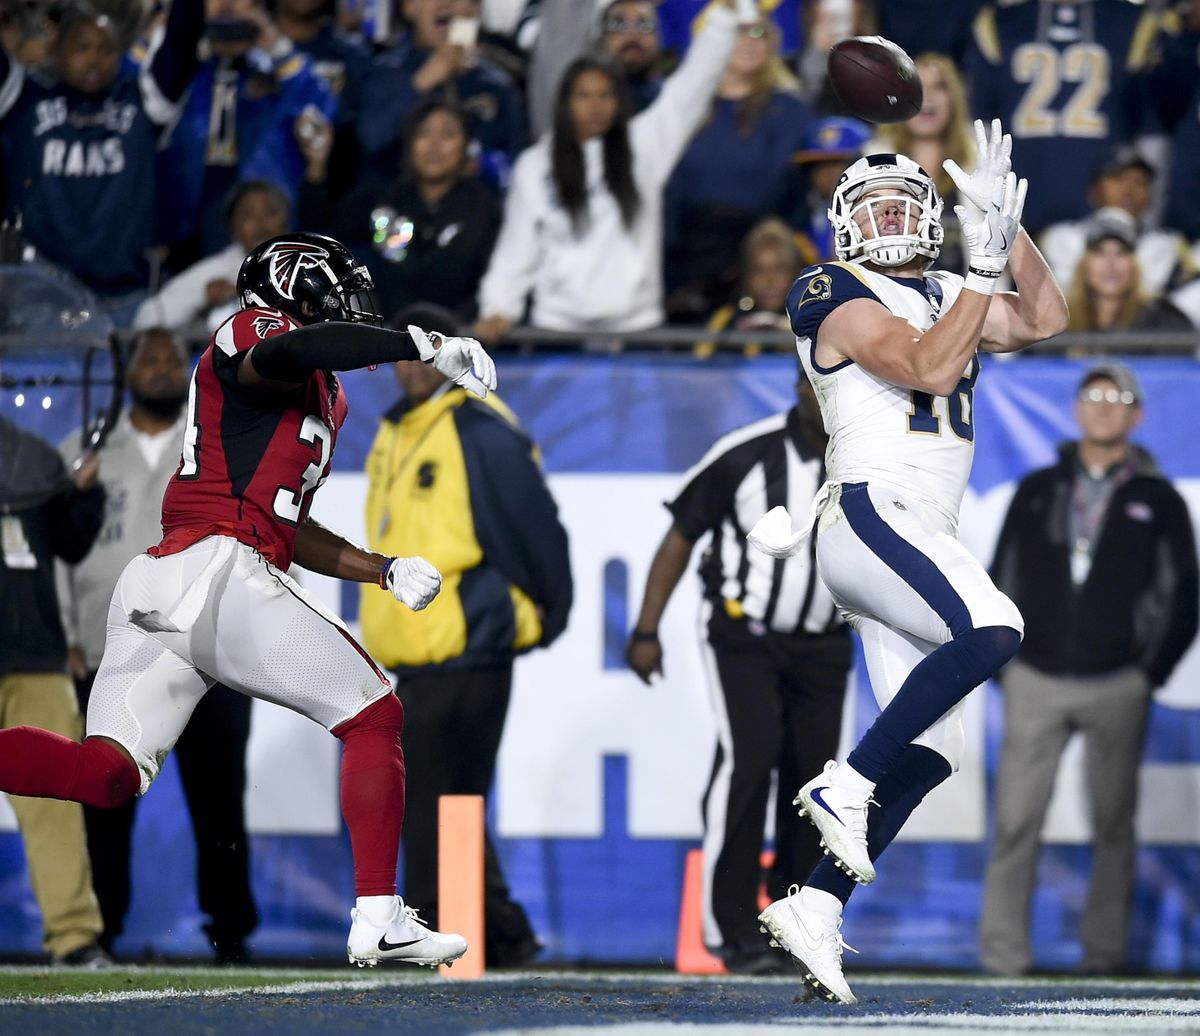 Los Angeles Rams wide receiver Cooper Kupp catches a touchdown pass over Atlanta Falcons cornerback Brian Poole during the first half of a wild-card playoff game on Jan. 6 in Los Angeles. (Kelvin Kuo / AP)